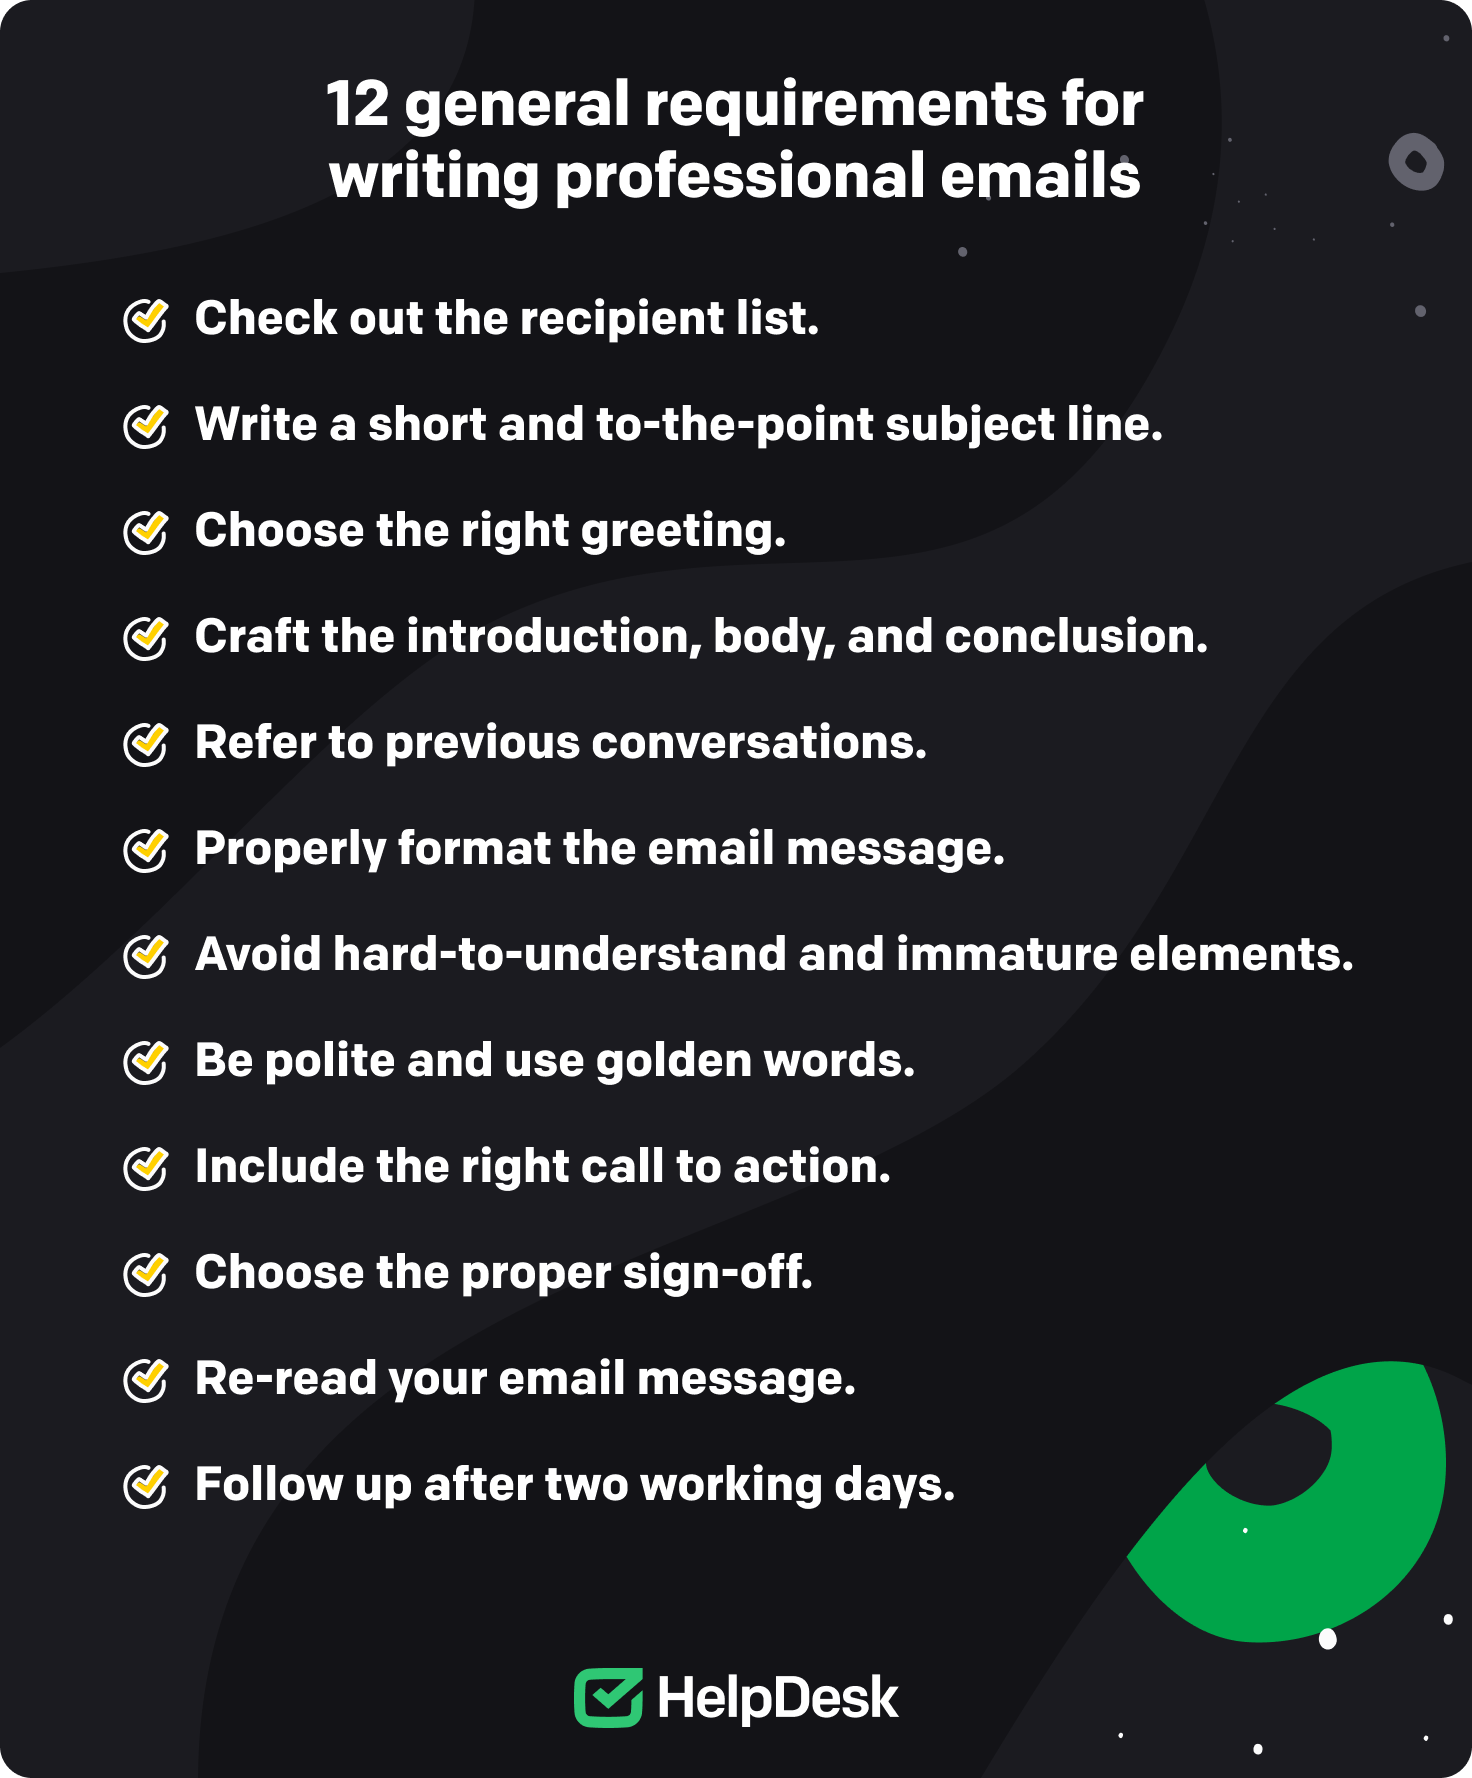 12 general requirements and rules for writing professional emails.